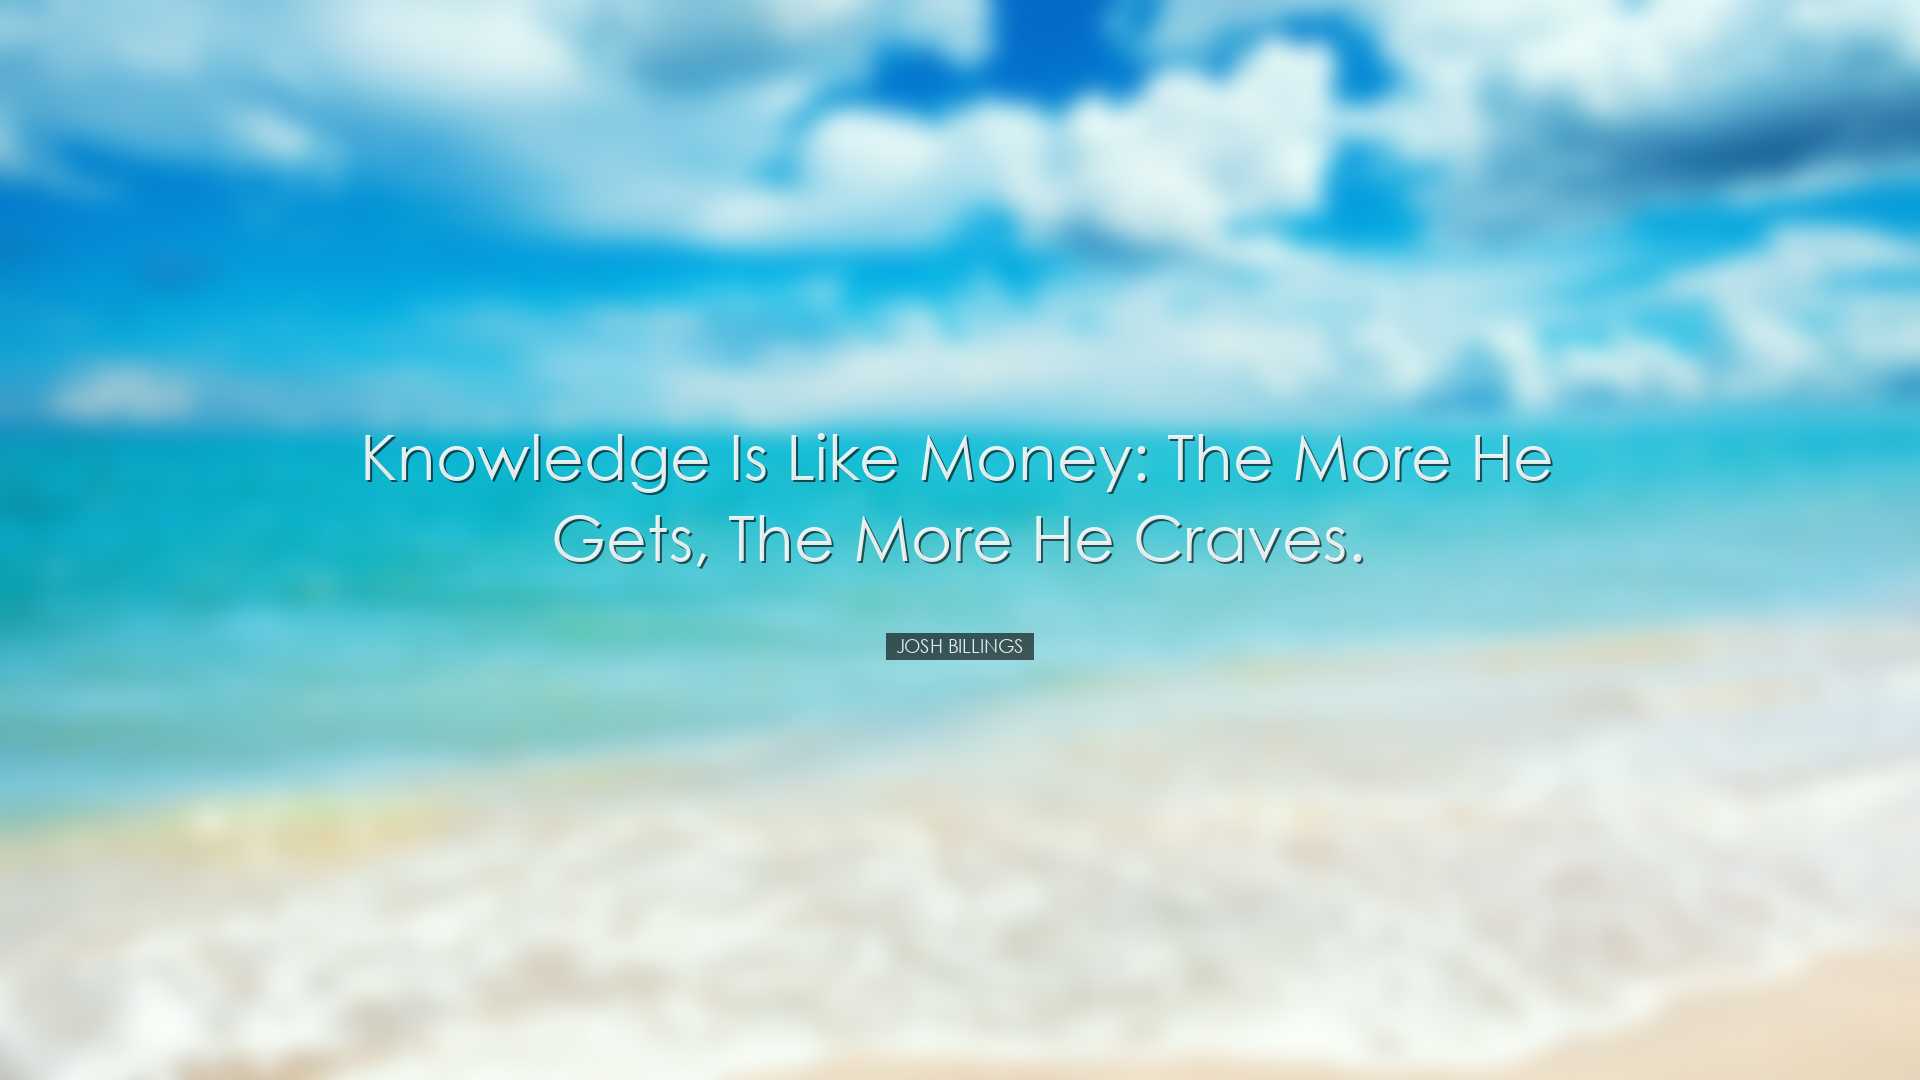 Knowledge is like money: the more he gets, the more he craves. - J